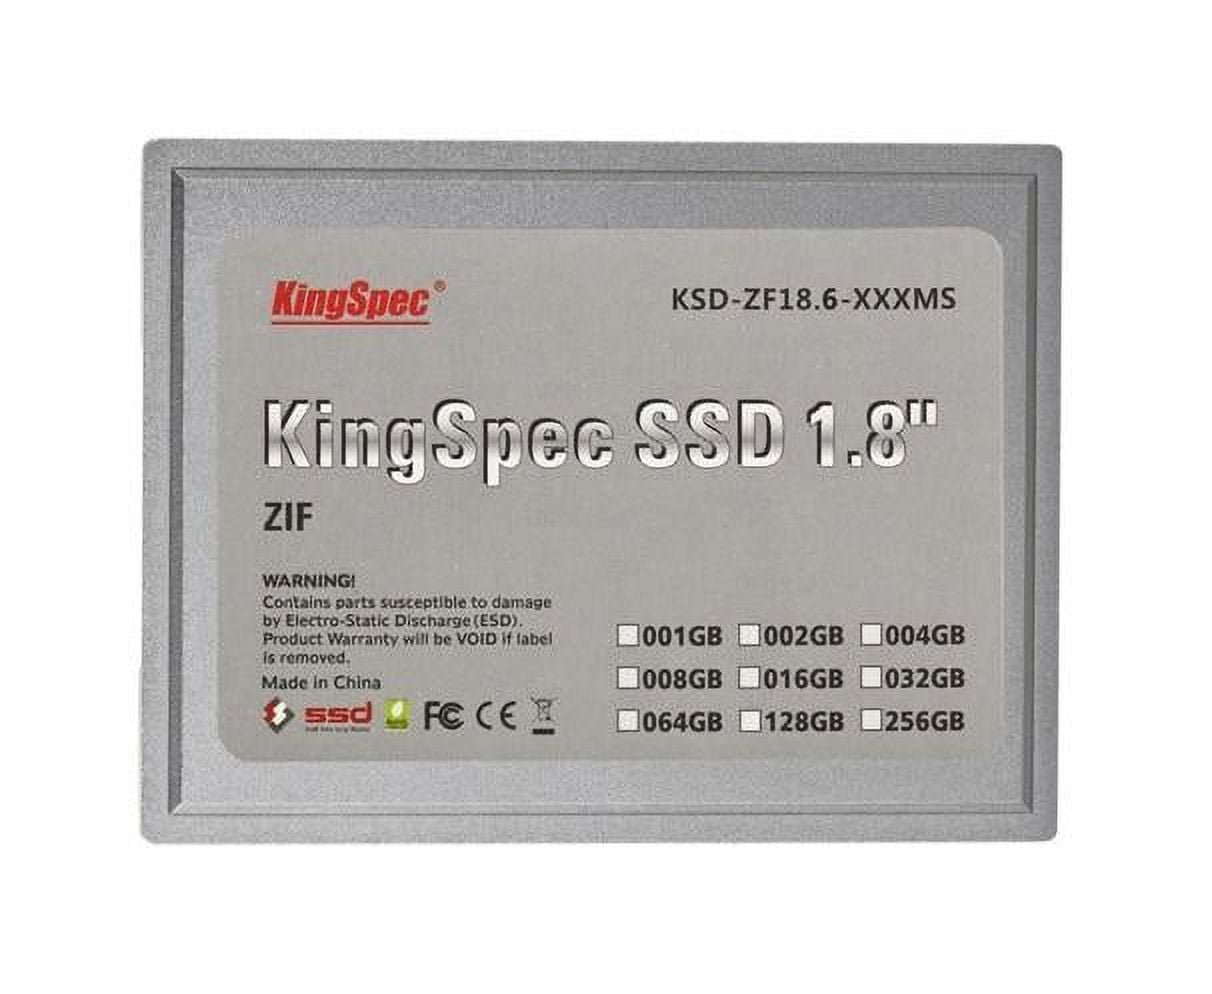 KingSpec Yansen 64GB 1.8 ZIF 40pin SSD Solid State Disk SM2236 Controller  Compatible with Compact PC, Old Laptop and Media Player